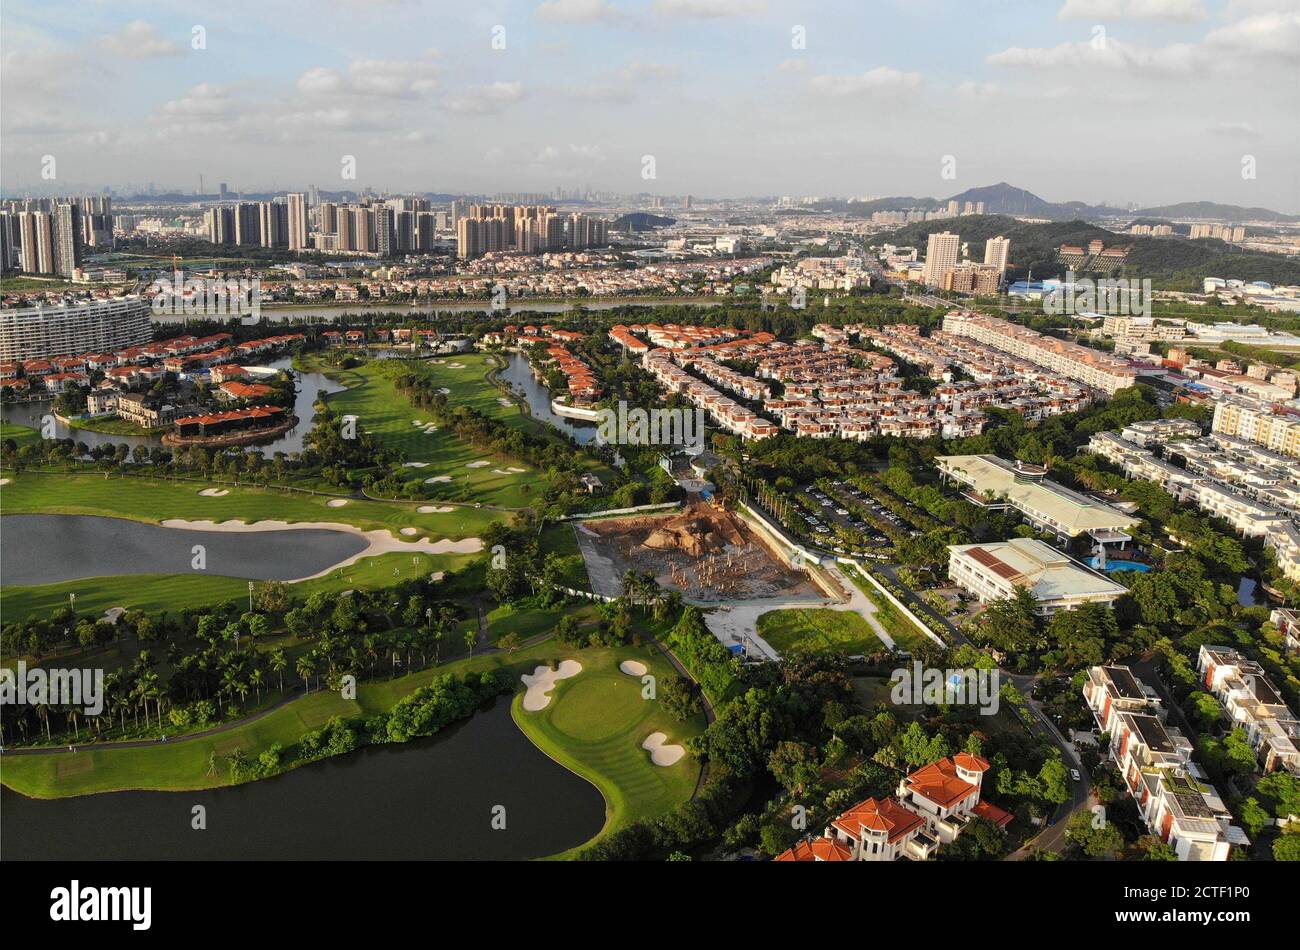 An aerial view of edifices, ports and the urban area of Beijiao town,  Shunde district, Foshan city, south China's Guangdong province, 28 August  2020 Stock Photo - Alamy